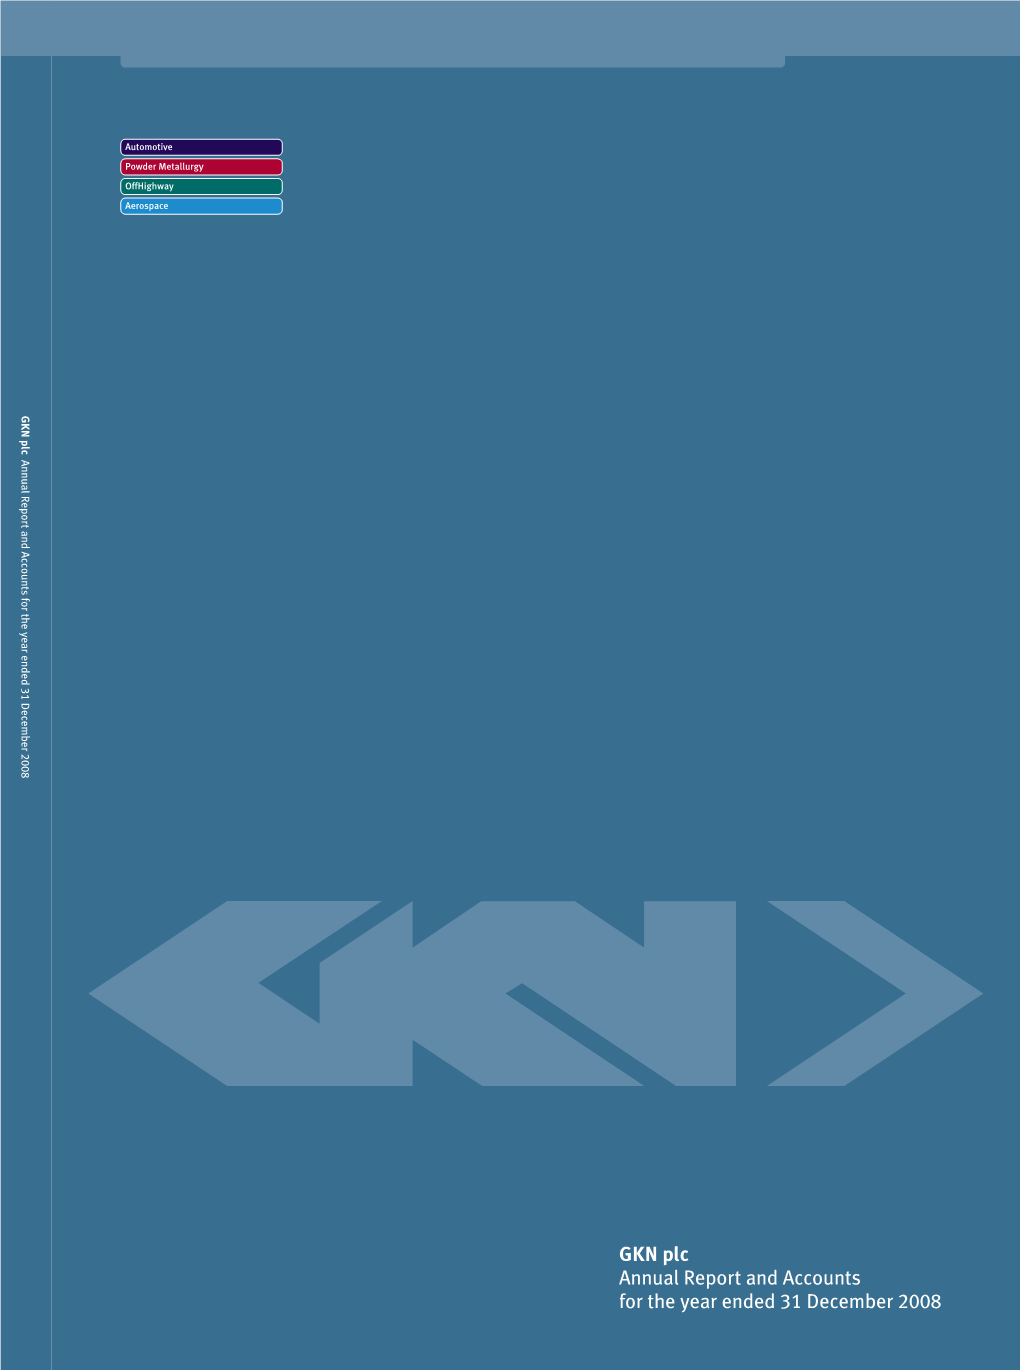 GKN Plc Annual Report and Accounts for the Year Ended 31 December 2008